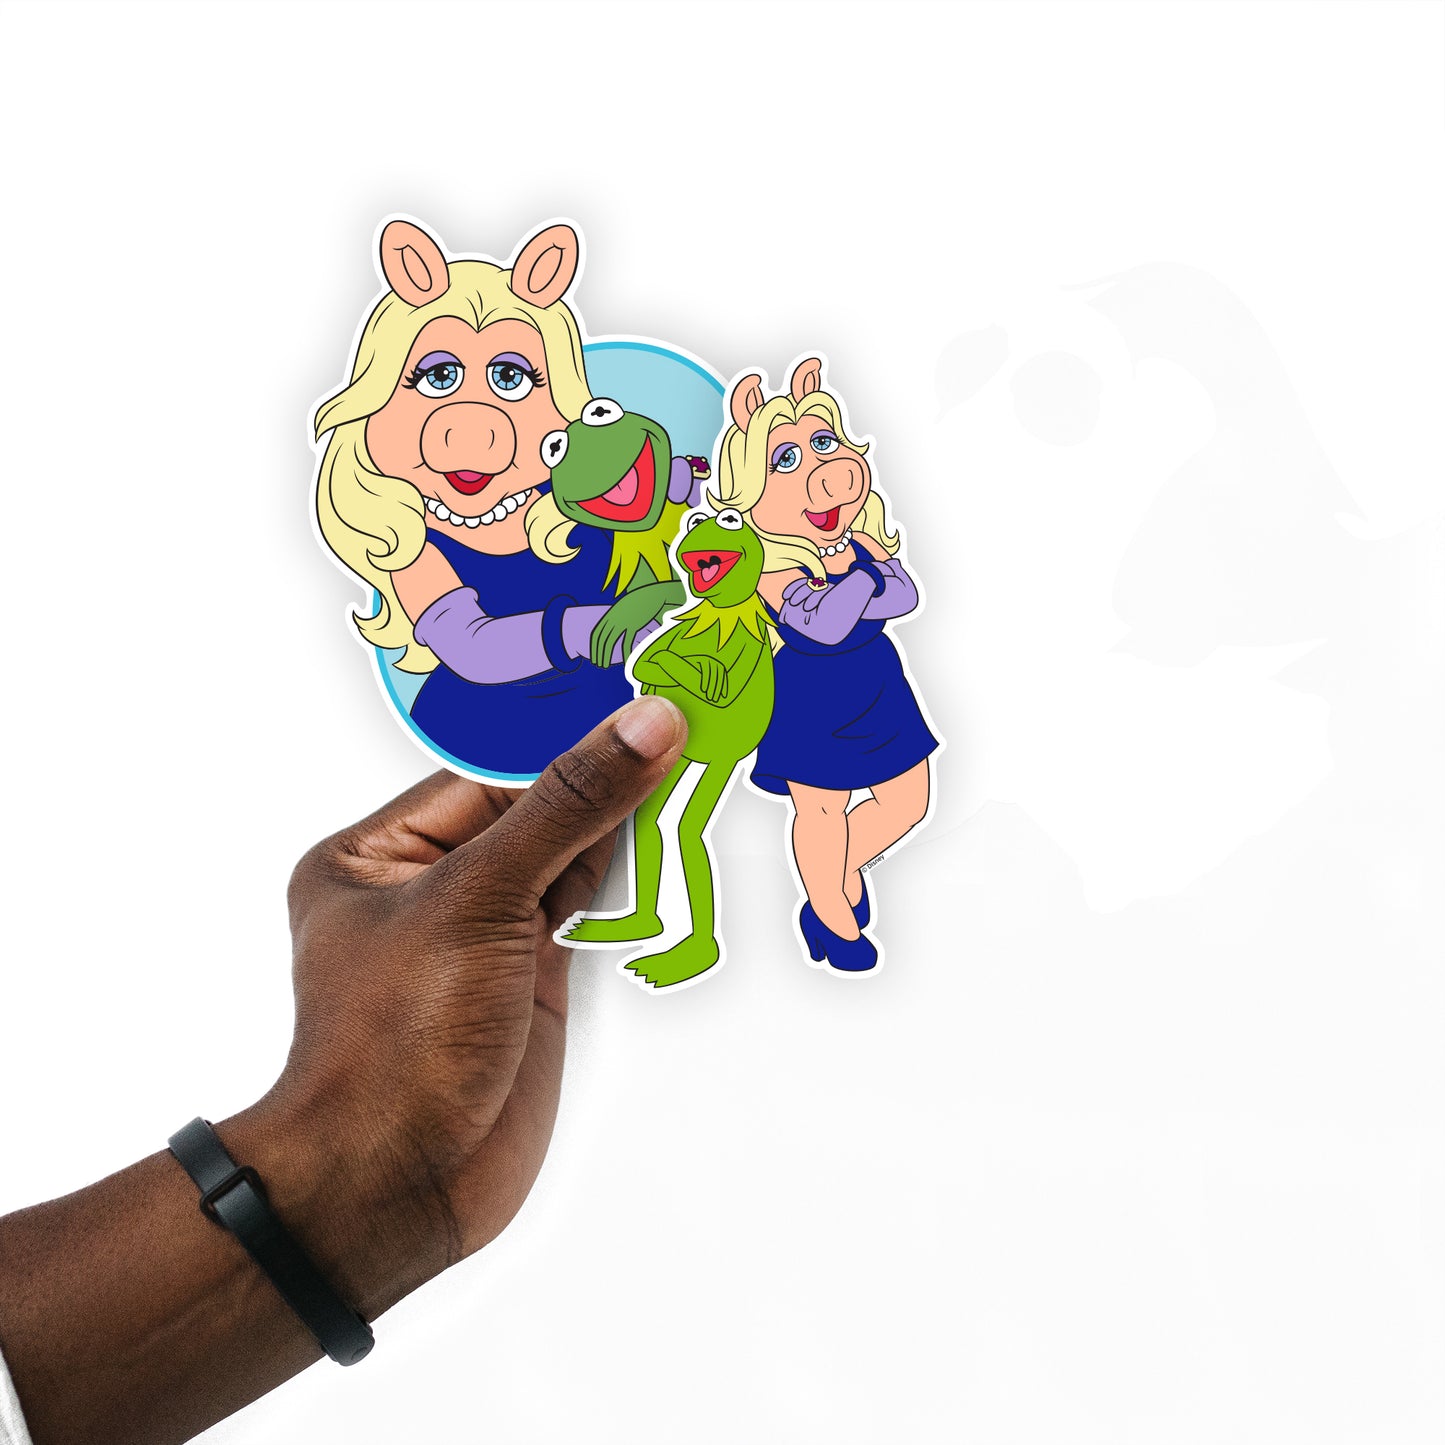 Sheet of 4 -Sheet of 4 -The Muppets: Kermit & Ms. Piggy Minis        - Officially Licensed Disney Removable     Adhesive Decal